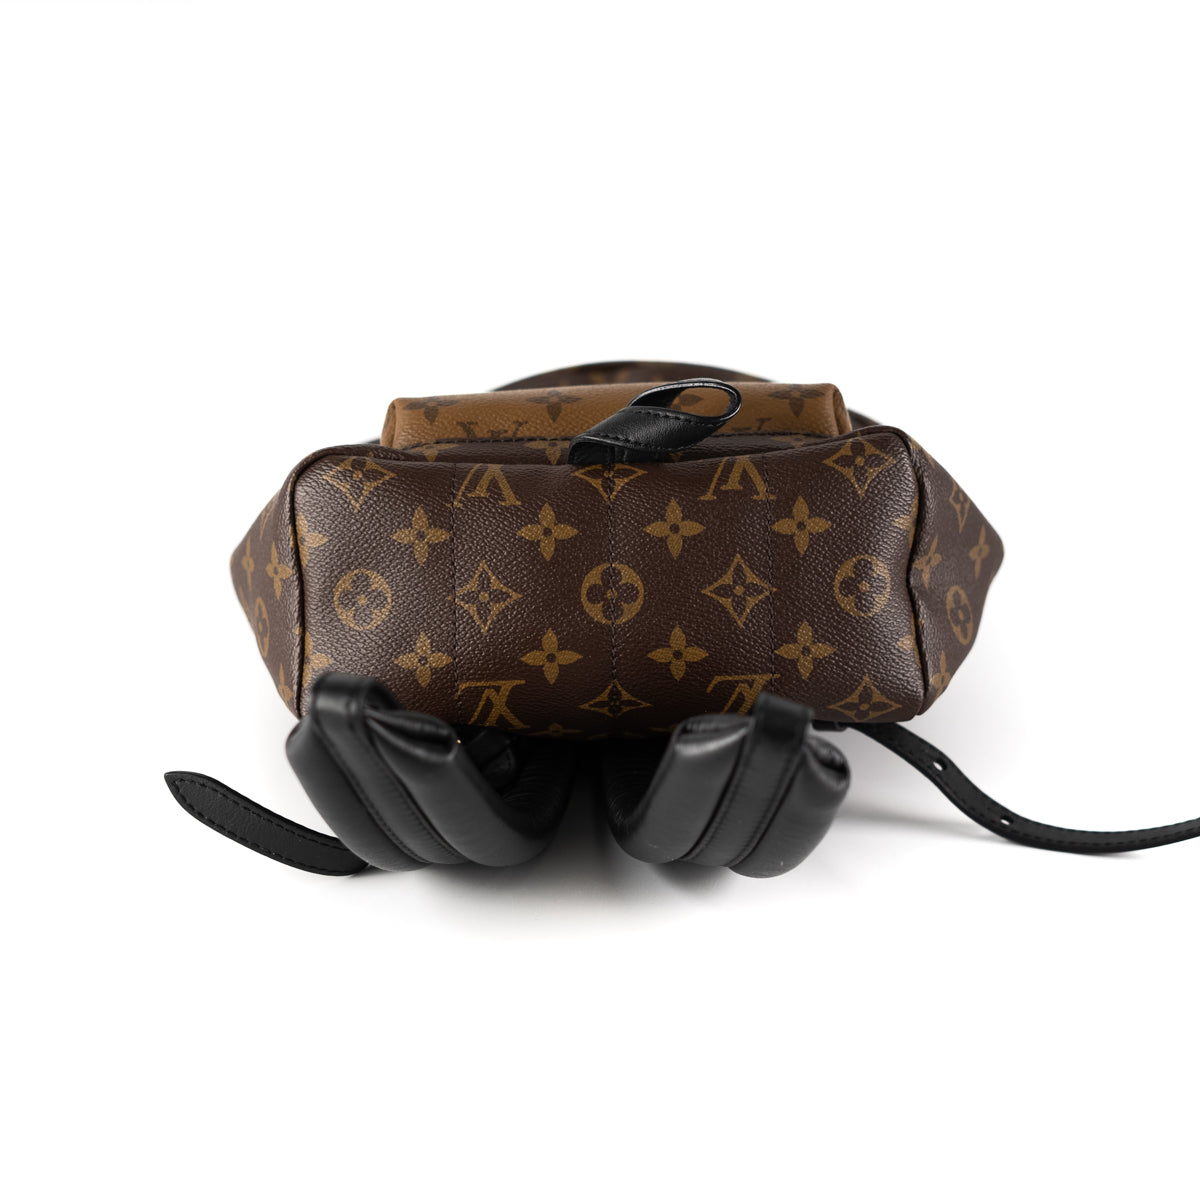 Shopping with James: Louis Vuitton Reversed Monogram Palm Spring